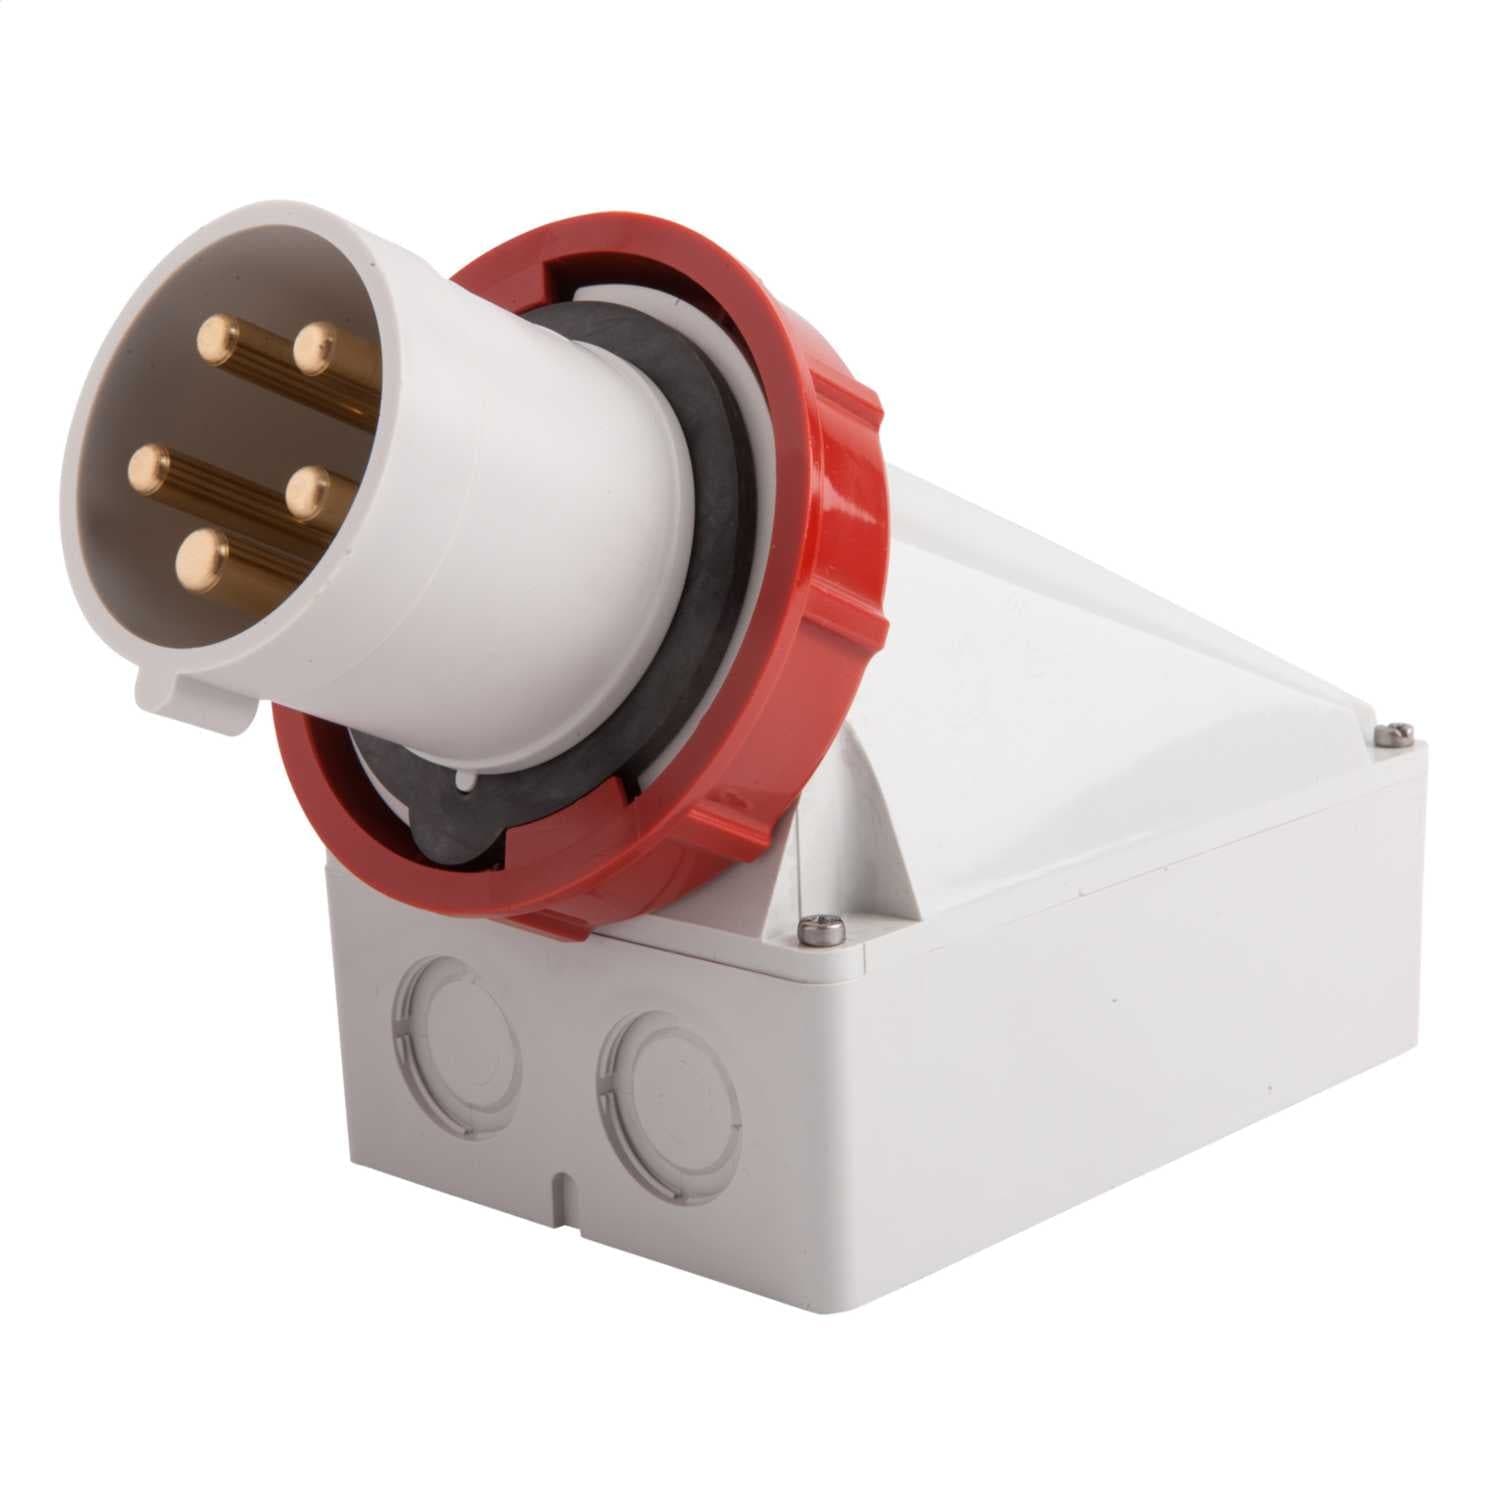 Industrial 63A Wall Mounted Plug & Socket | Heavy-Duty Electrical Connection - Supply Master Accra, Ghana Switches & Sockets Buy Tools hardware Building materials